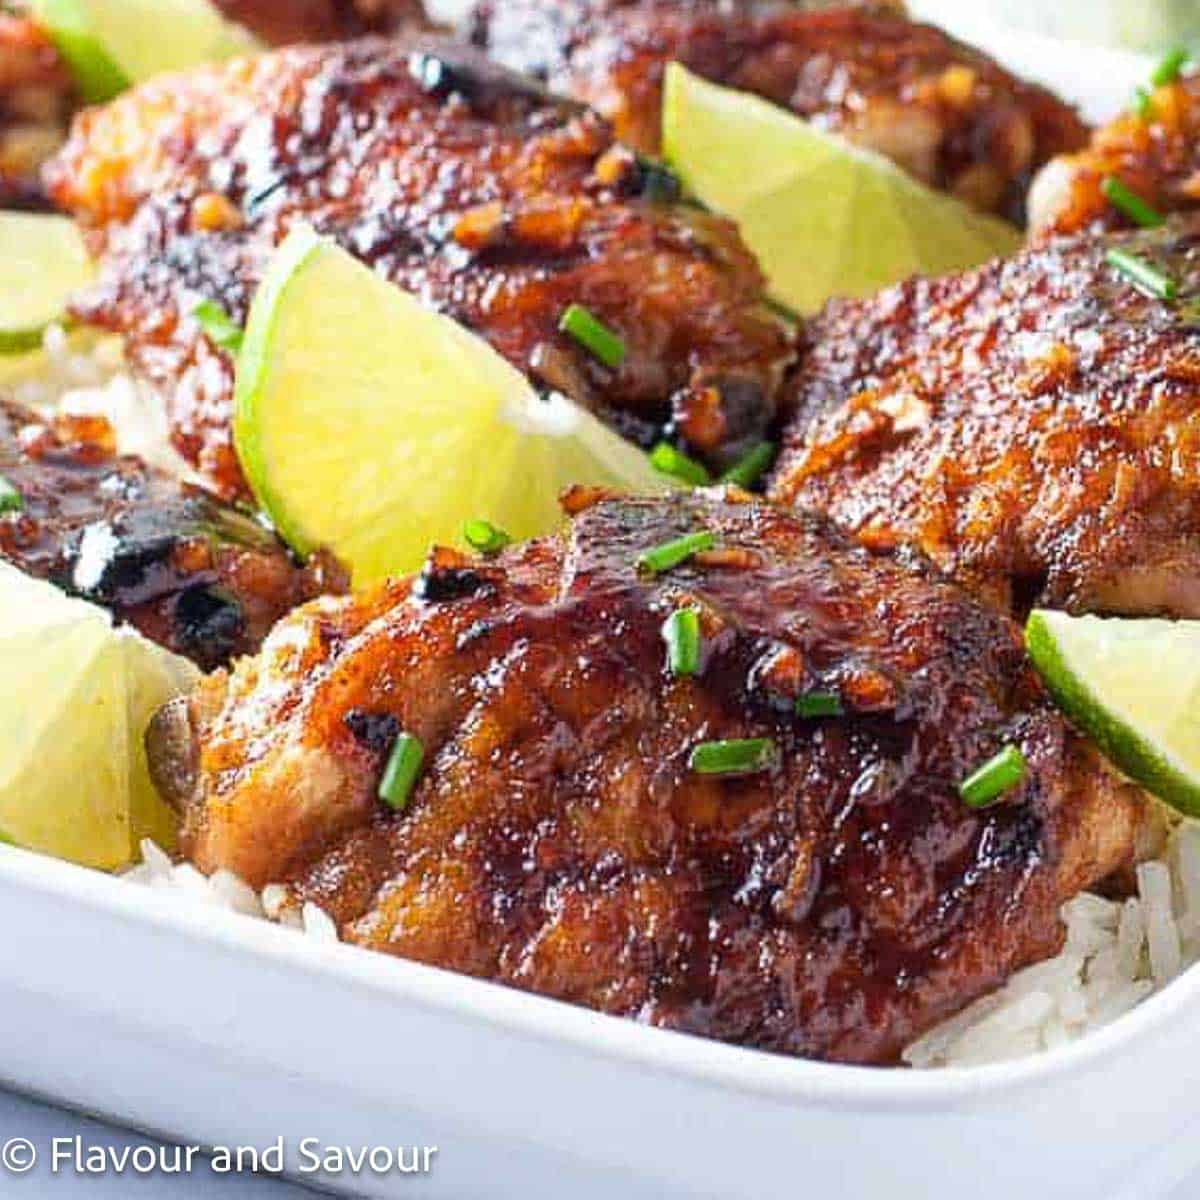 A platter of honey-lime chili chicken thighs on rice.